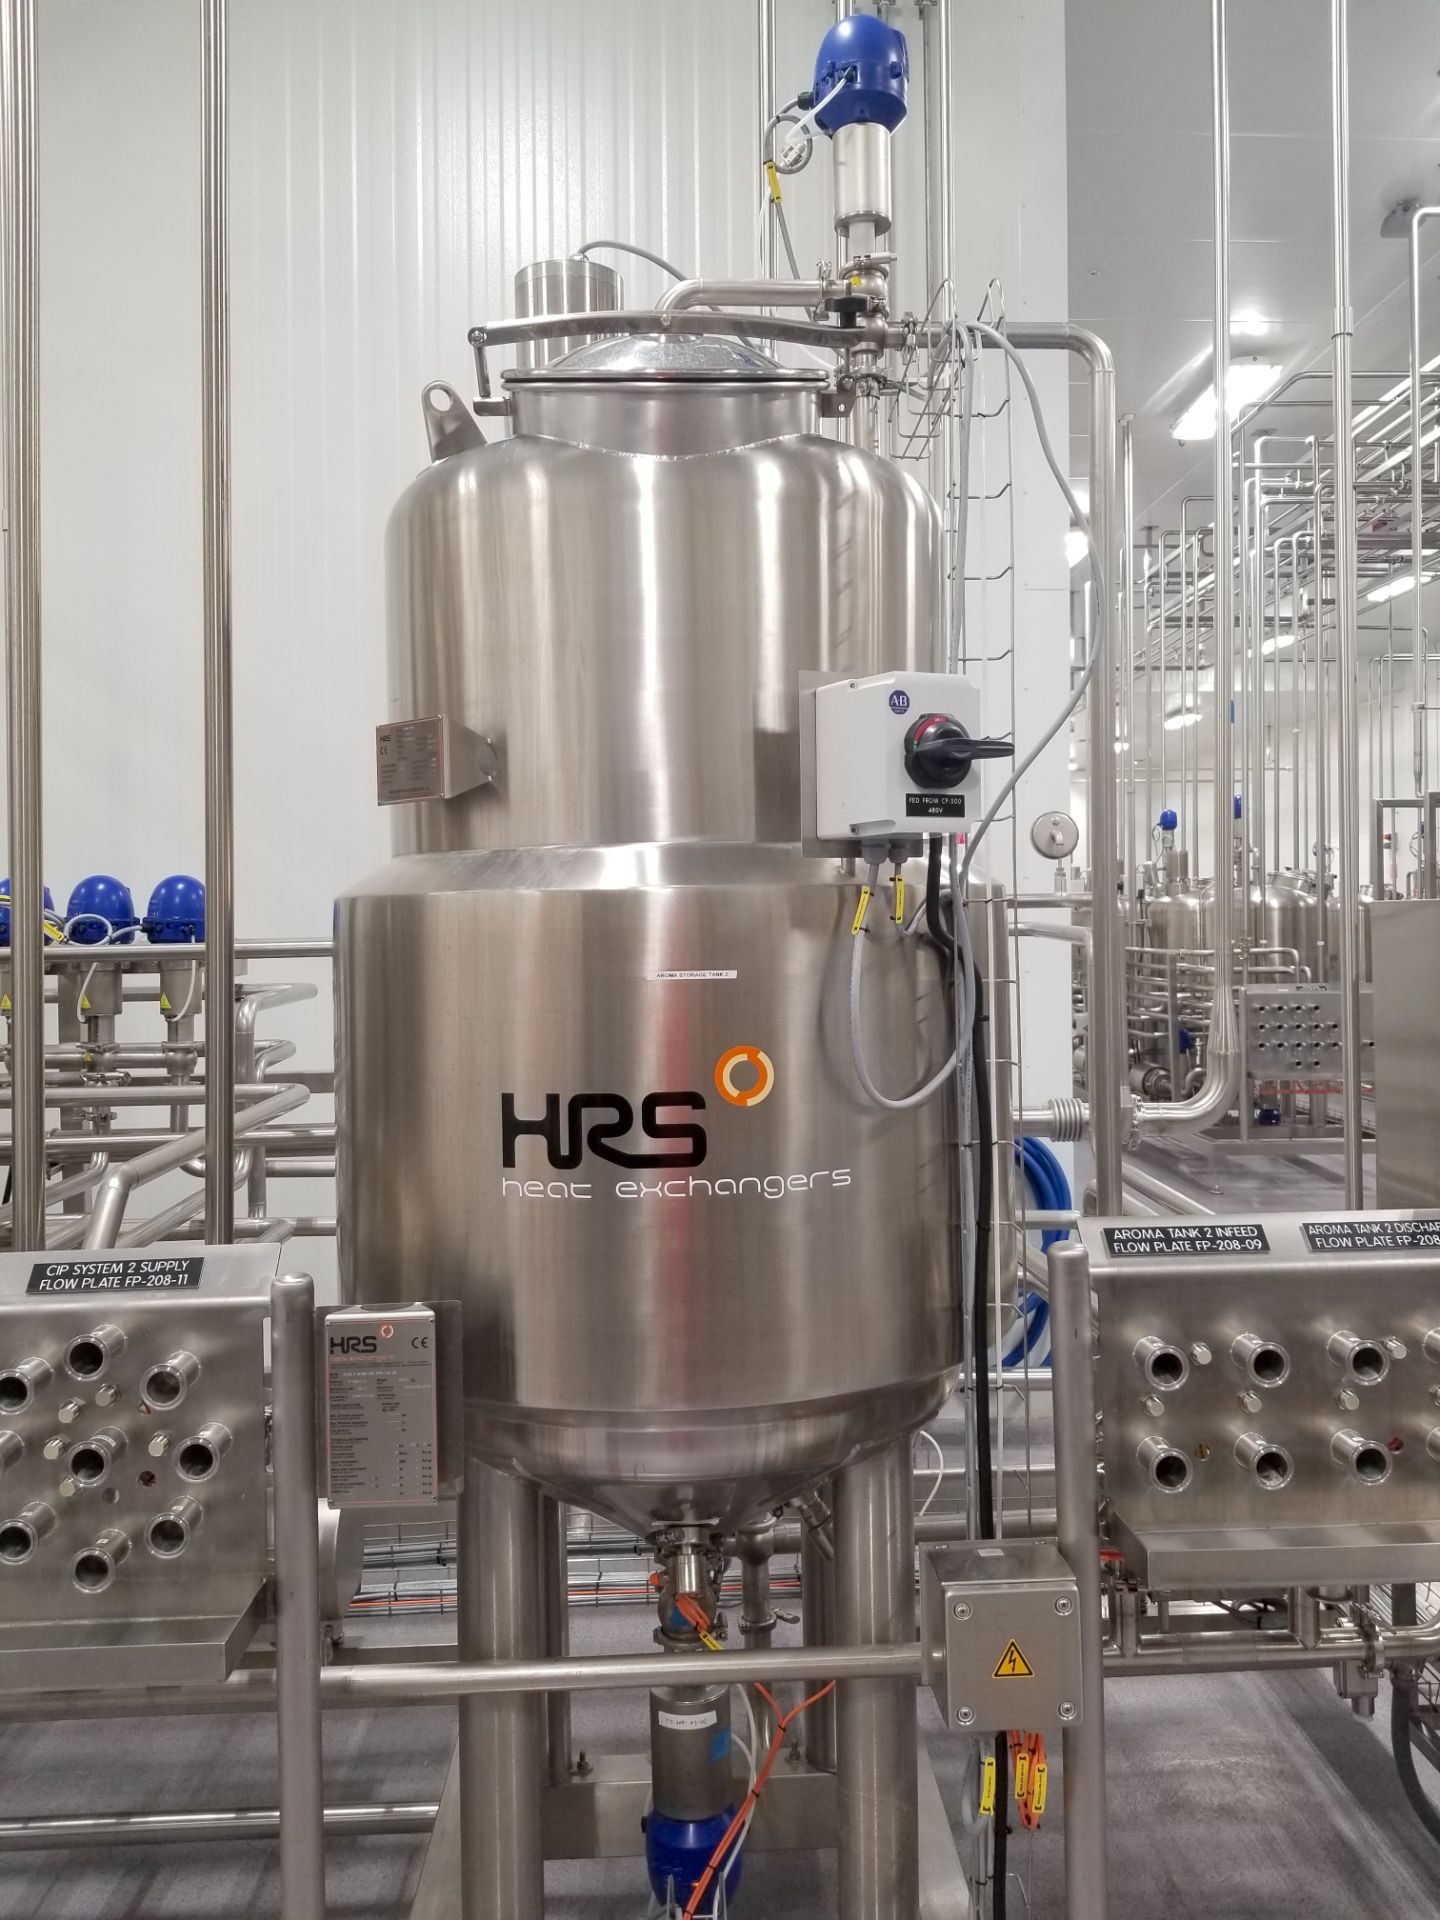 HRS Blend and Aroma Tank Skid - Image 13 of 46